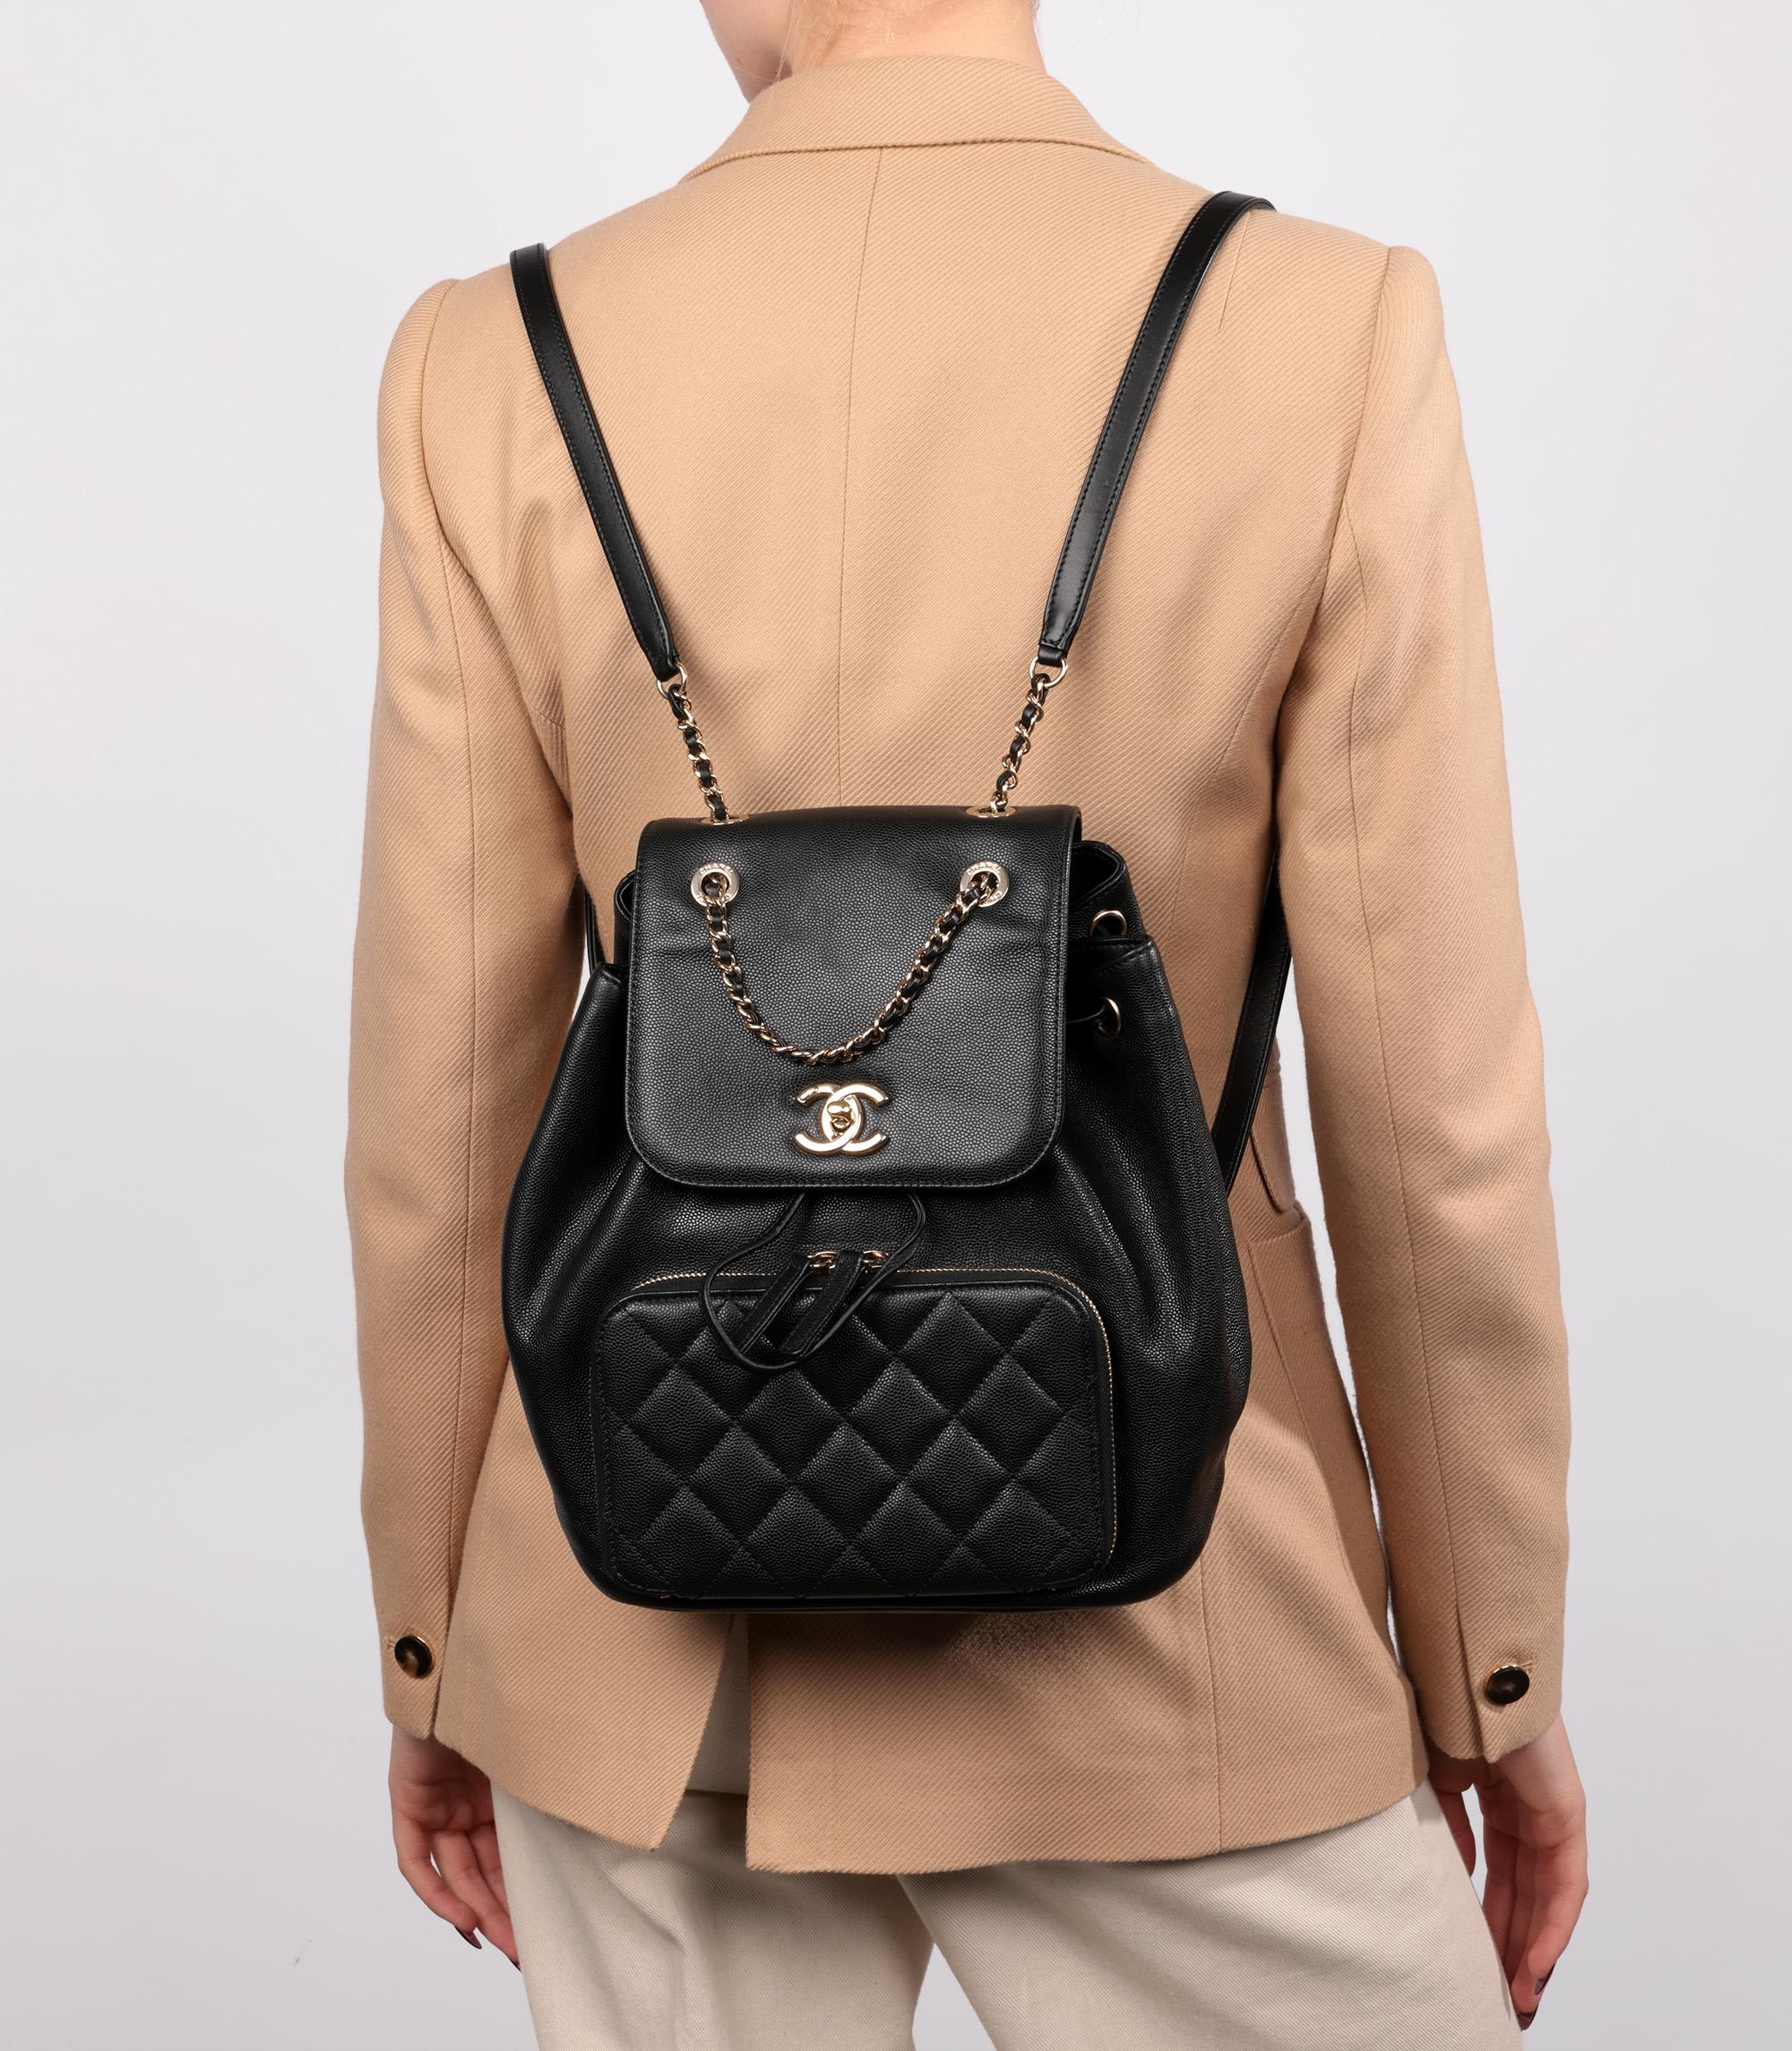 Chanel Black Caviar Leather & Lambskin Affinity Backpack

Brand- Chanel
Model- Affinity Backpack
Product Type- Backpack
Serial Number- 23******
Age- Circa 2016
Accompanied By- Chanel Box, Authenticity Card, Care Booklet
Colour- Black
Hardware-